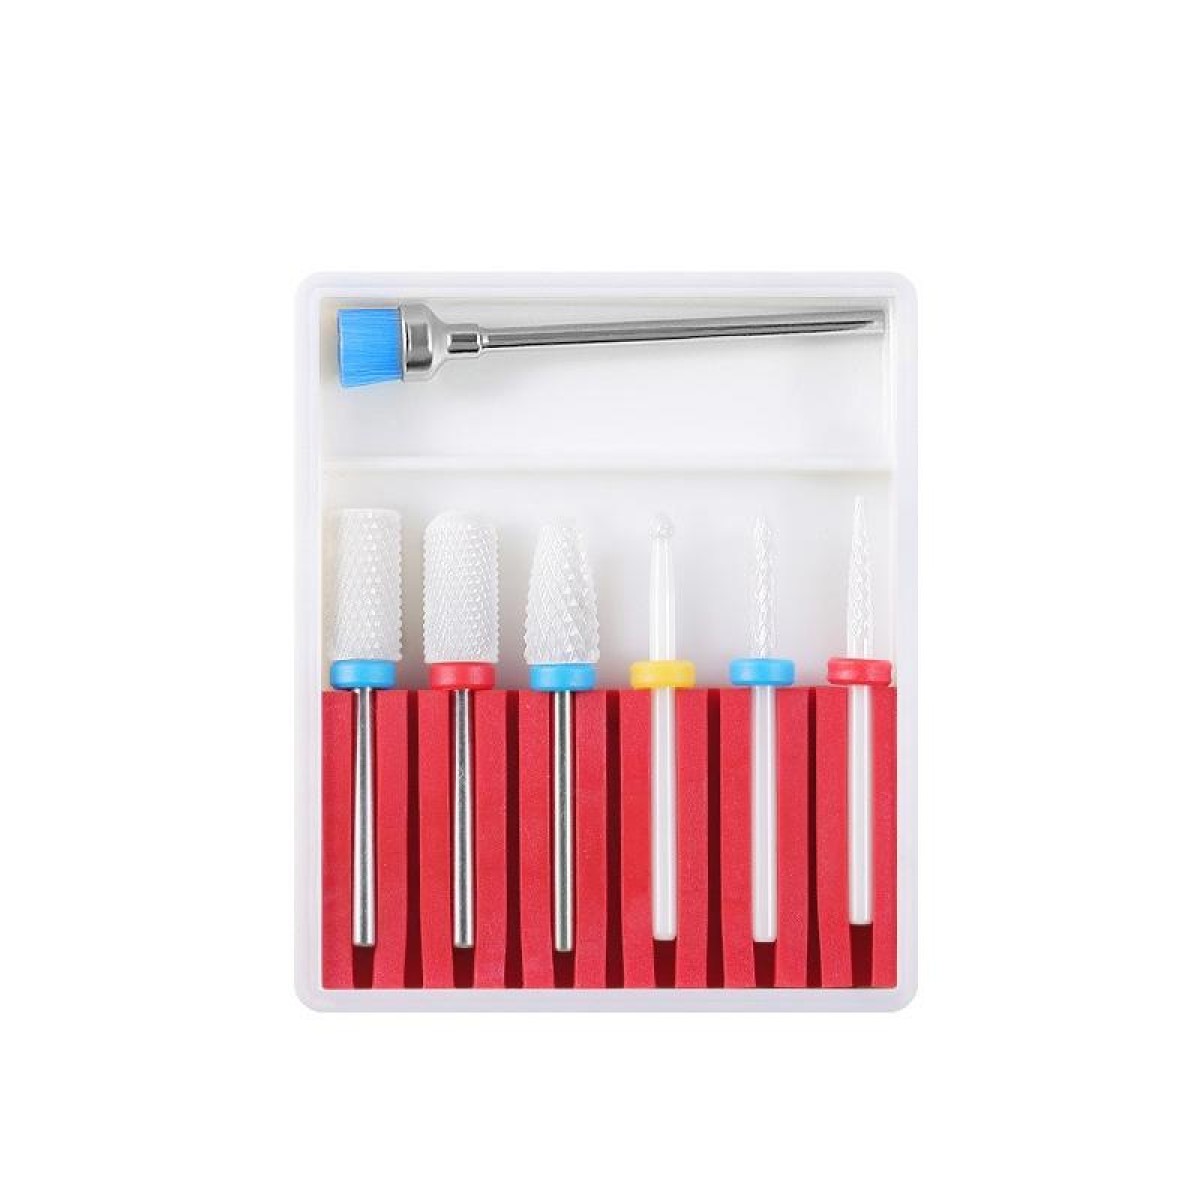 Nail Art Ceramic Tungsten Steel Alloy Grinding Heads Set Grinder Polishing Tool, Color Classification: GH-01